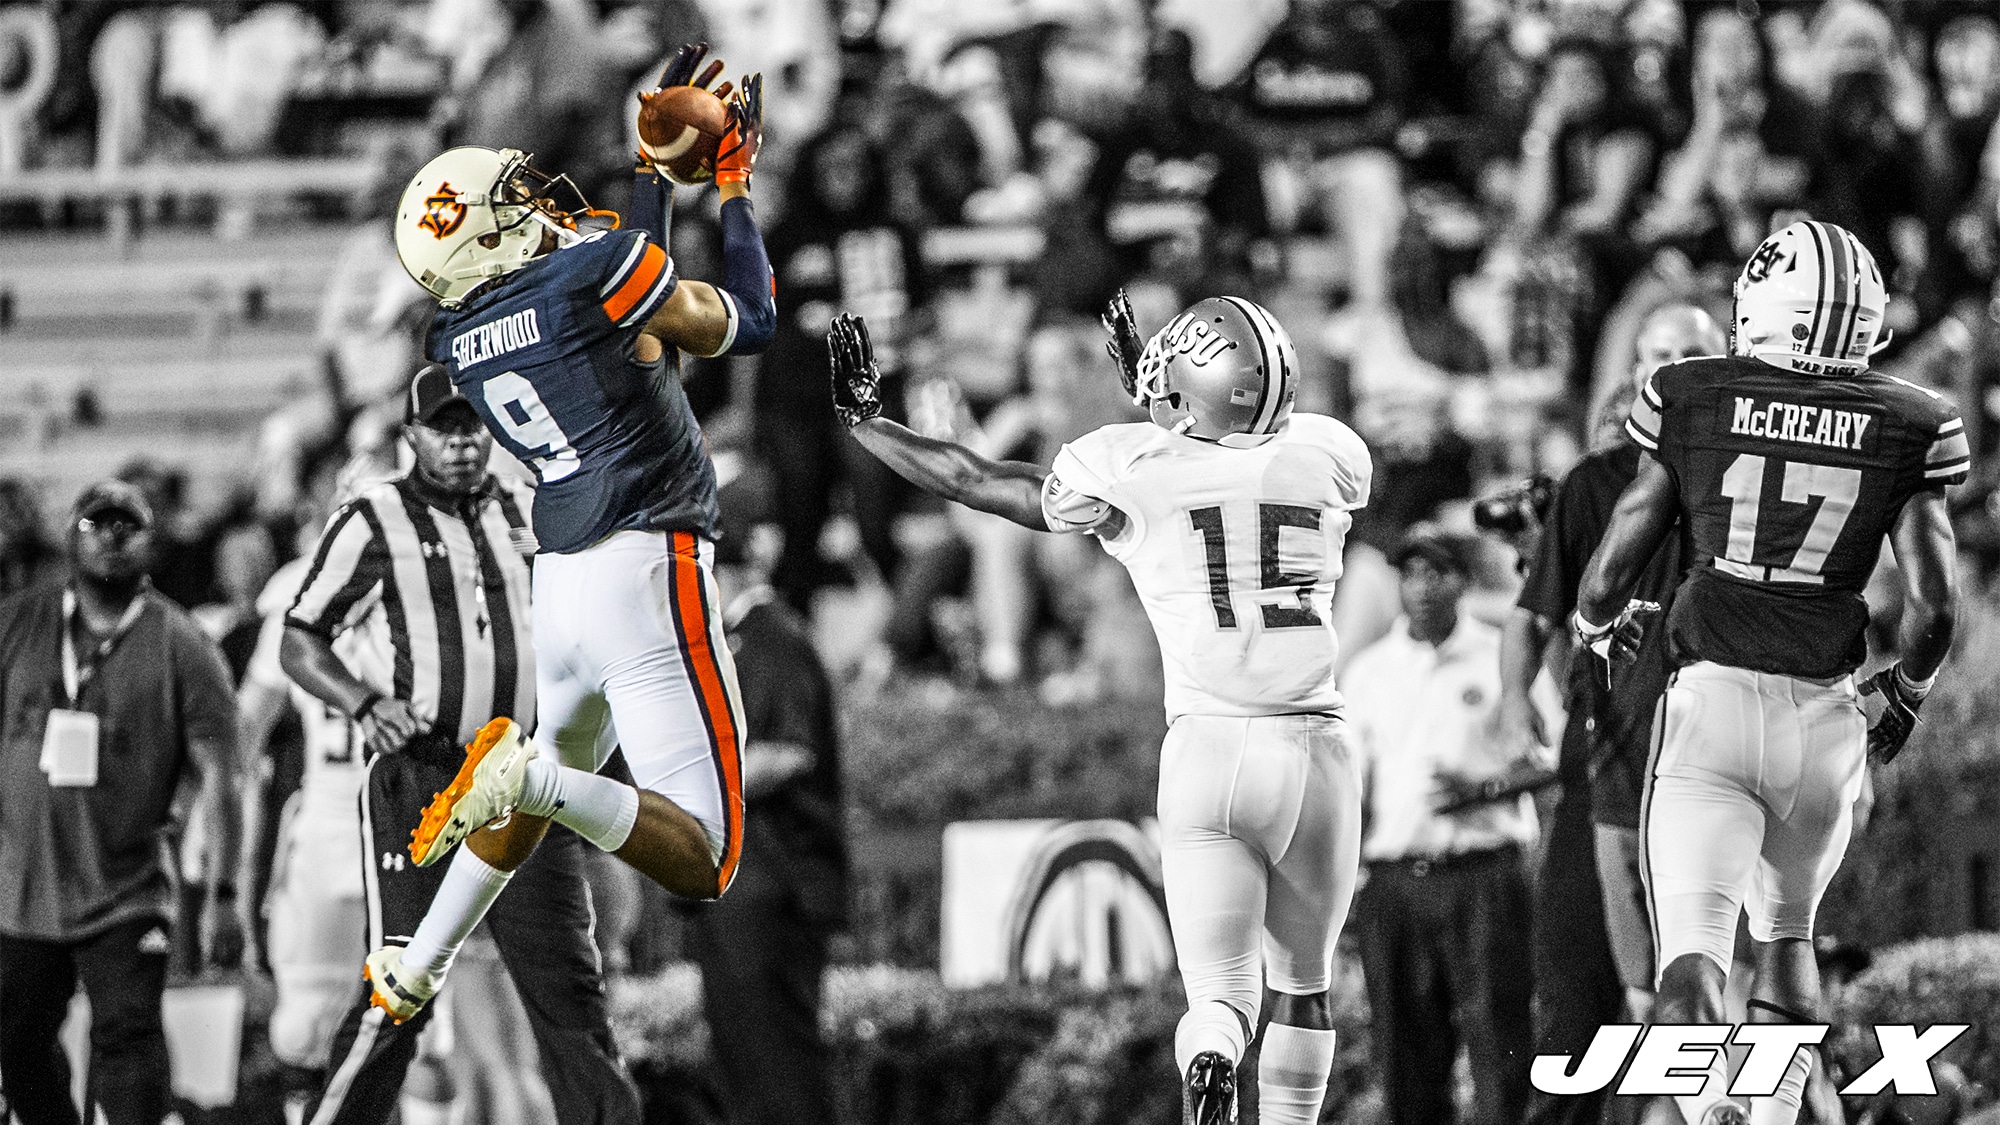 AUBURN, AL - SEPTEMBER 8: Defensive back Jamien Sherwood #9 of the Auburn Tigers intercepts a pass intended for wide receiver Joe Williams IV #15 of the Alabama State Hornets during the fourth quarter at Jordan-Hare Stadium on September 8, 2018 in Auburn, Alabama.